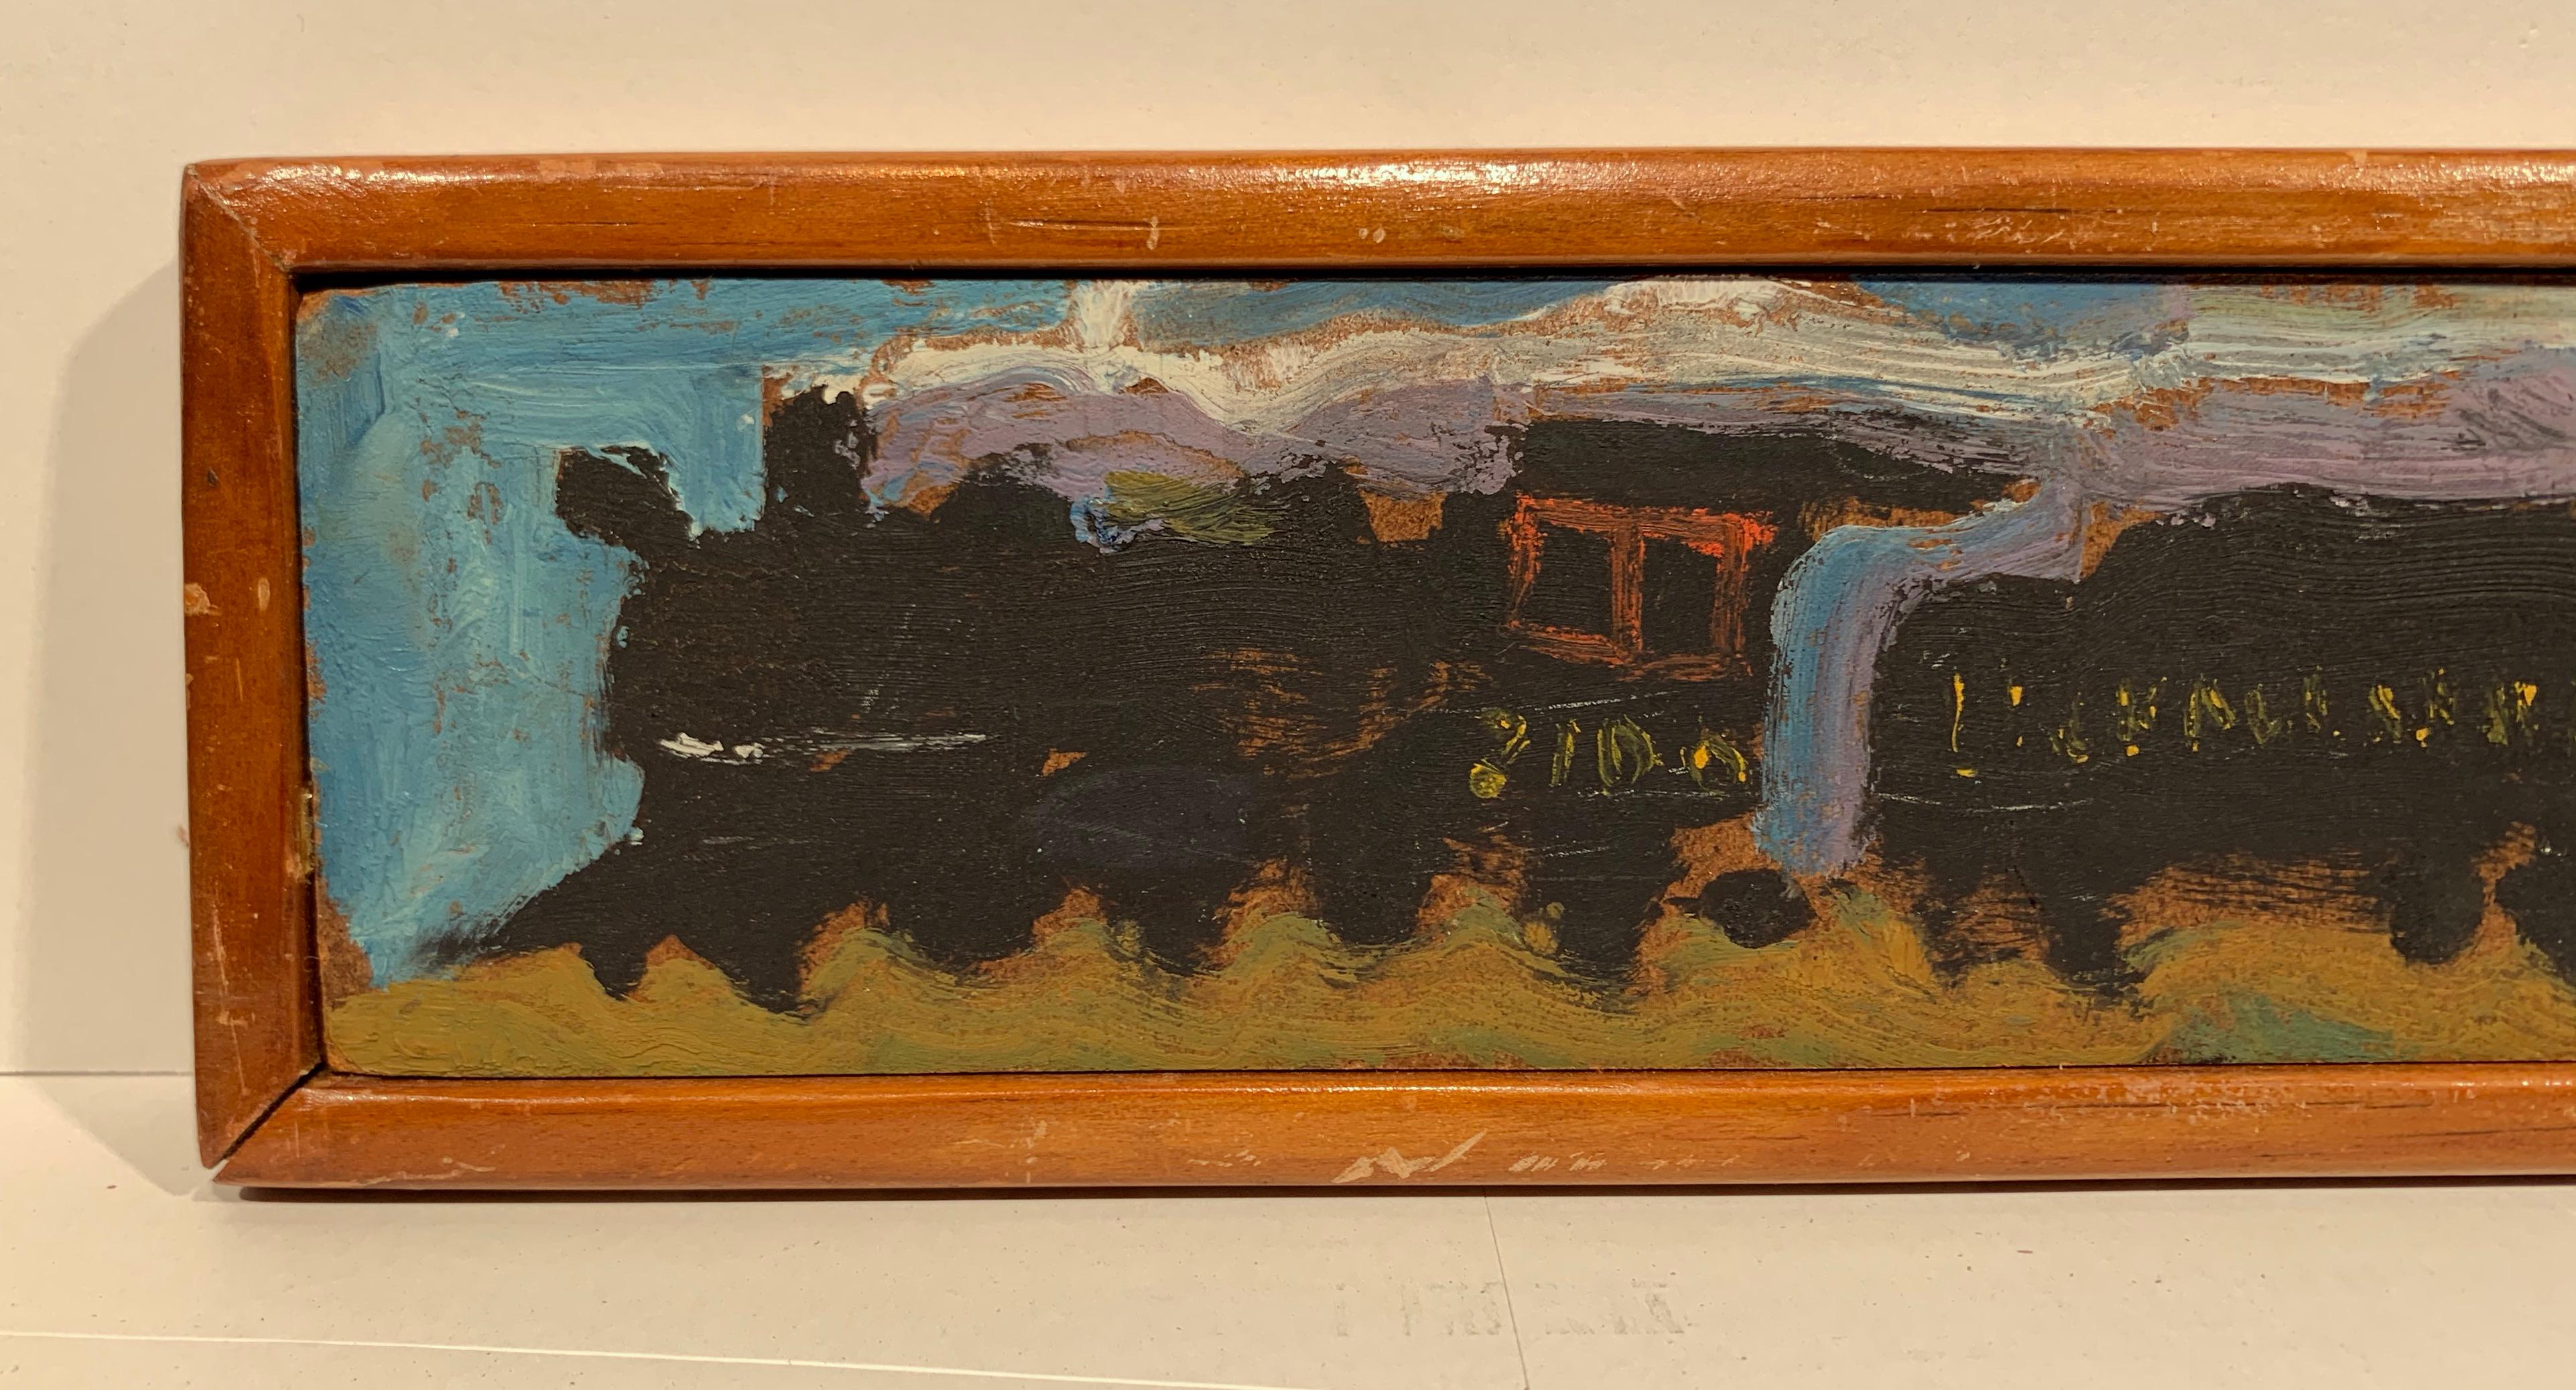 Yellow Caboose #2 (Lackawanna Railroad Freight Train Steam engine painting) - Painting by Sterling Boyd Strauser